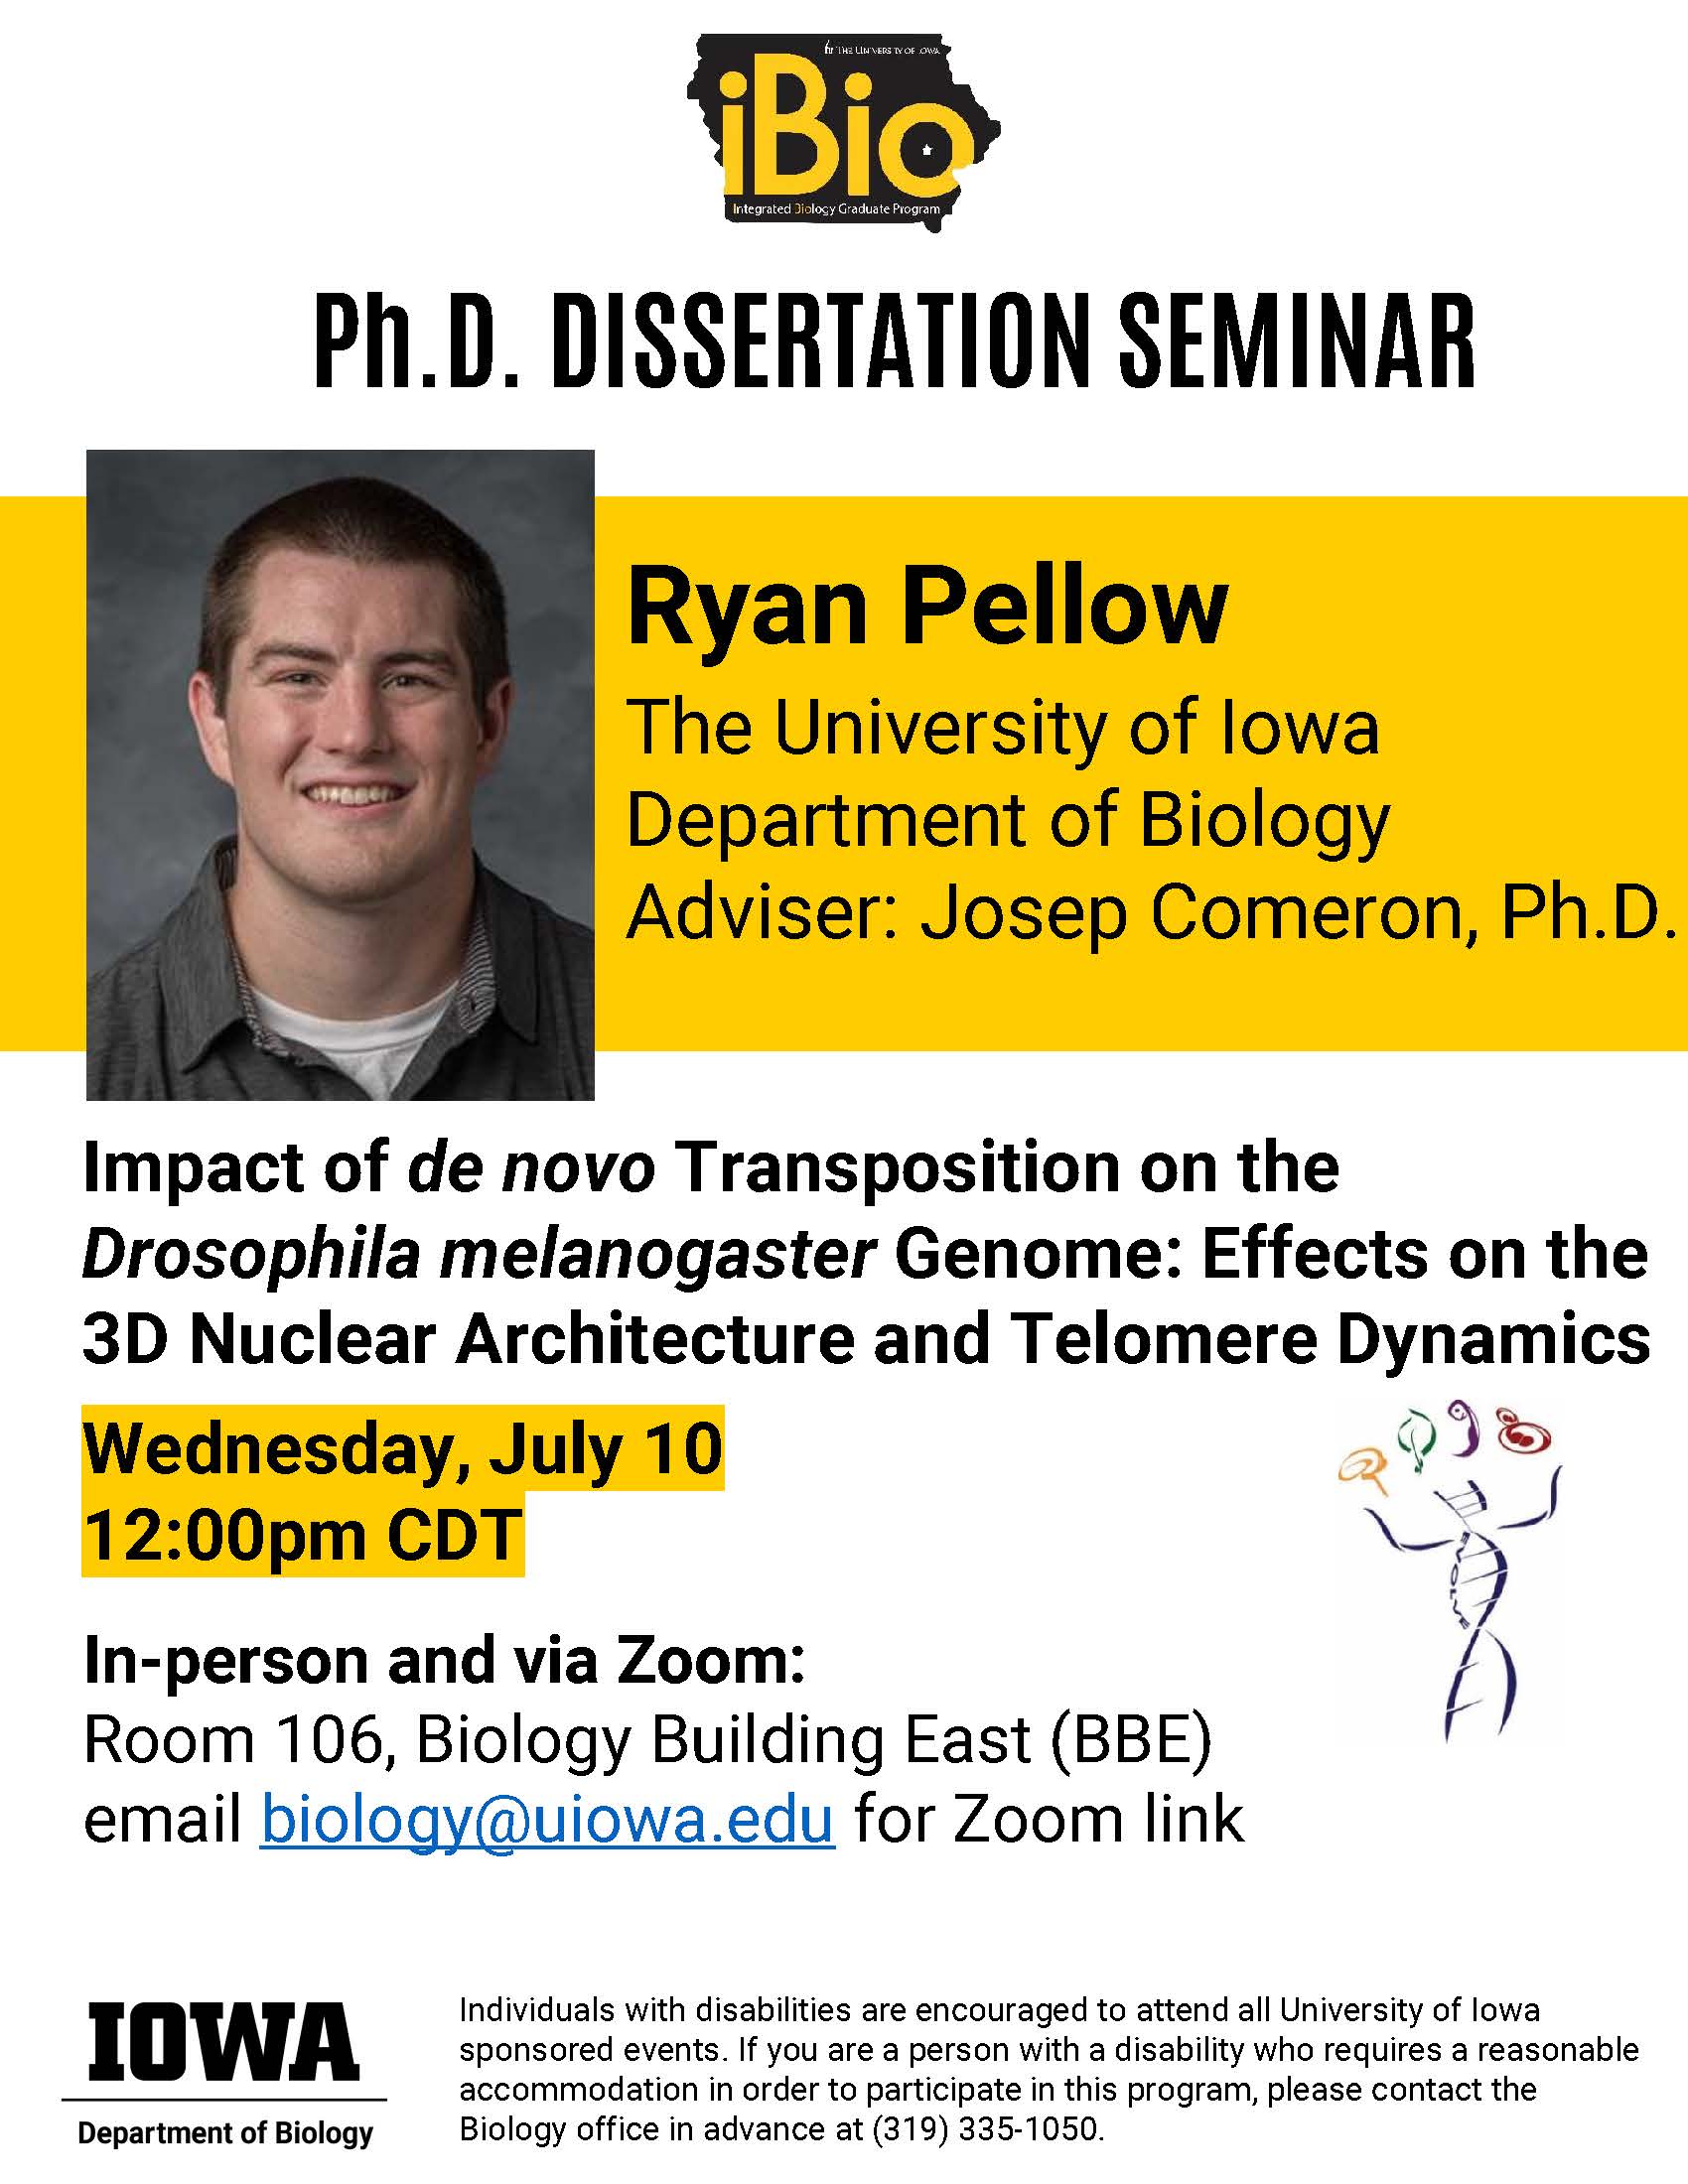 Ryan Pellow's Ph.D. Dissertation Seminar on Wednesday, July 10 at 12pm in 106 BBE and via Zoom